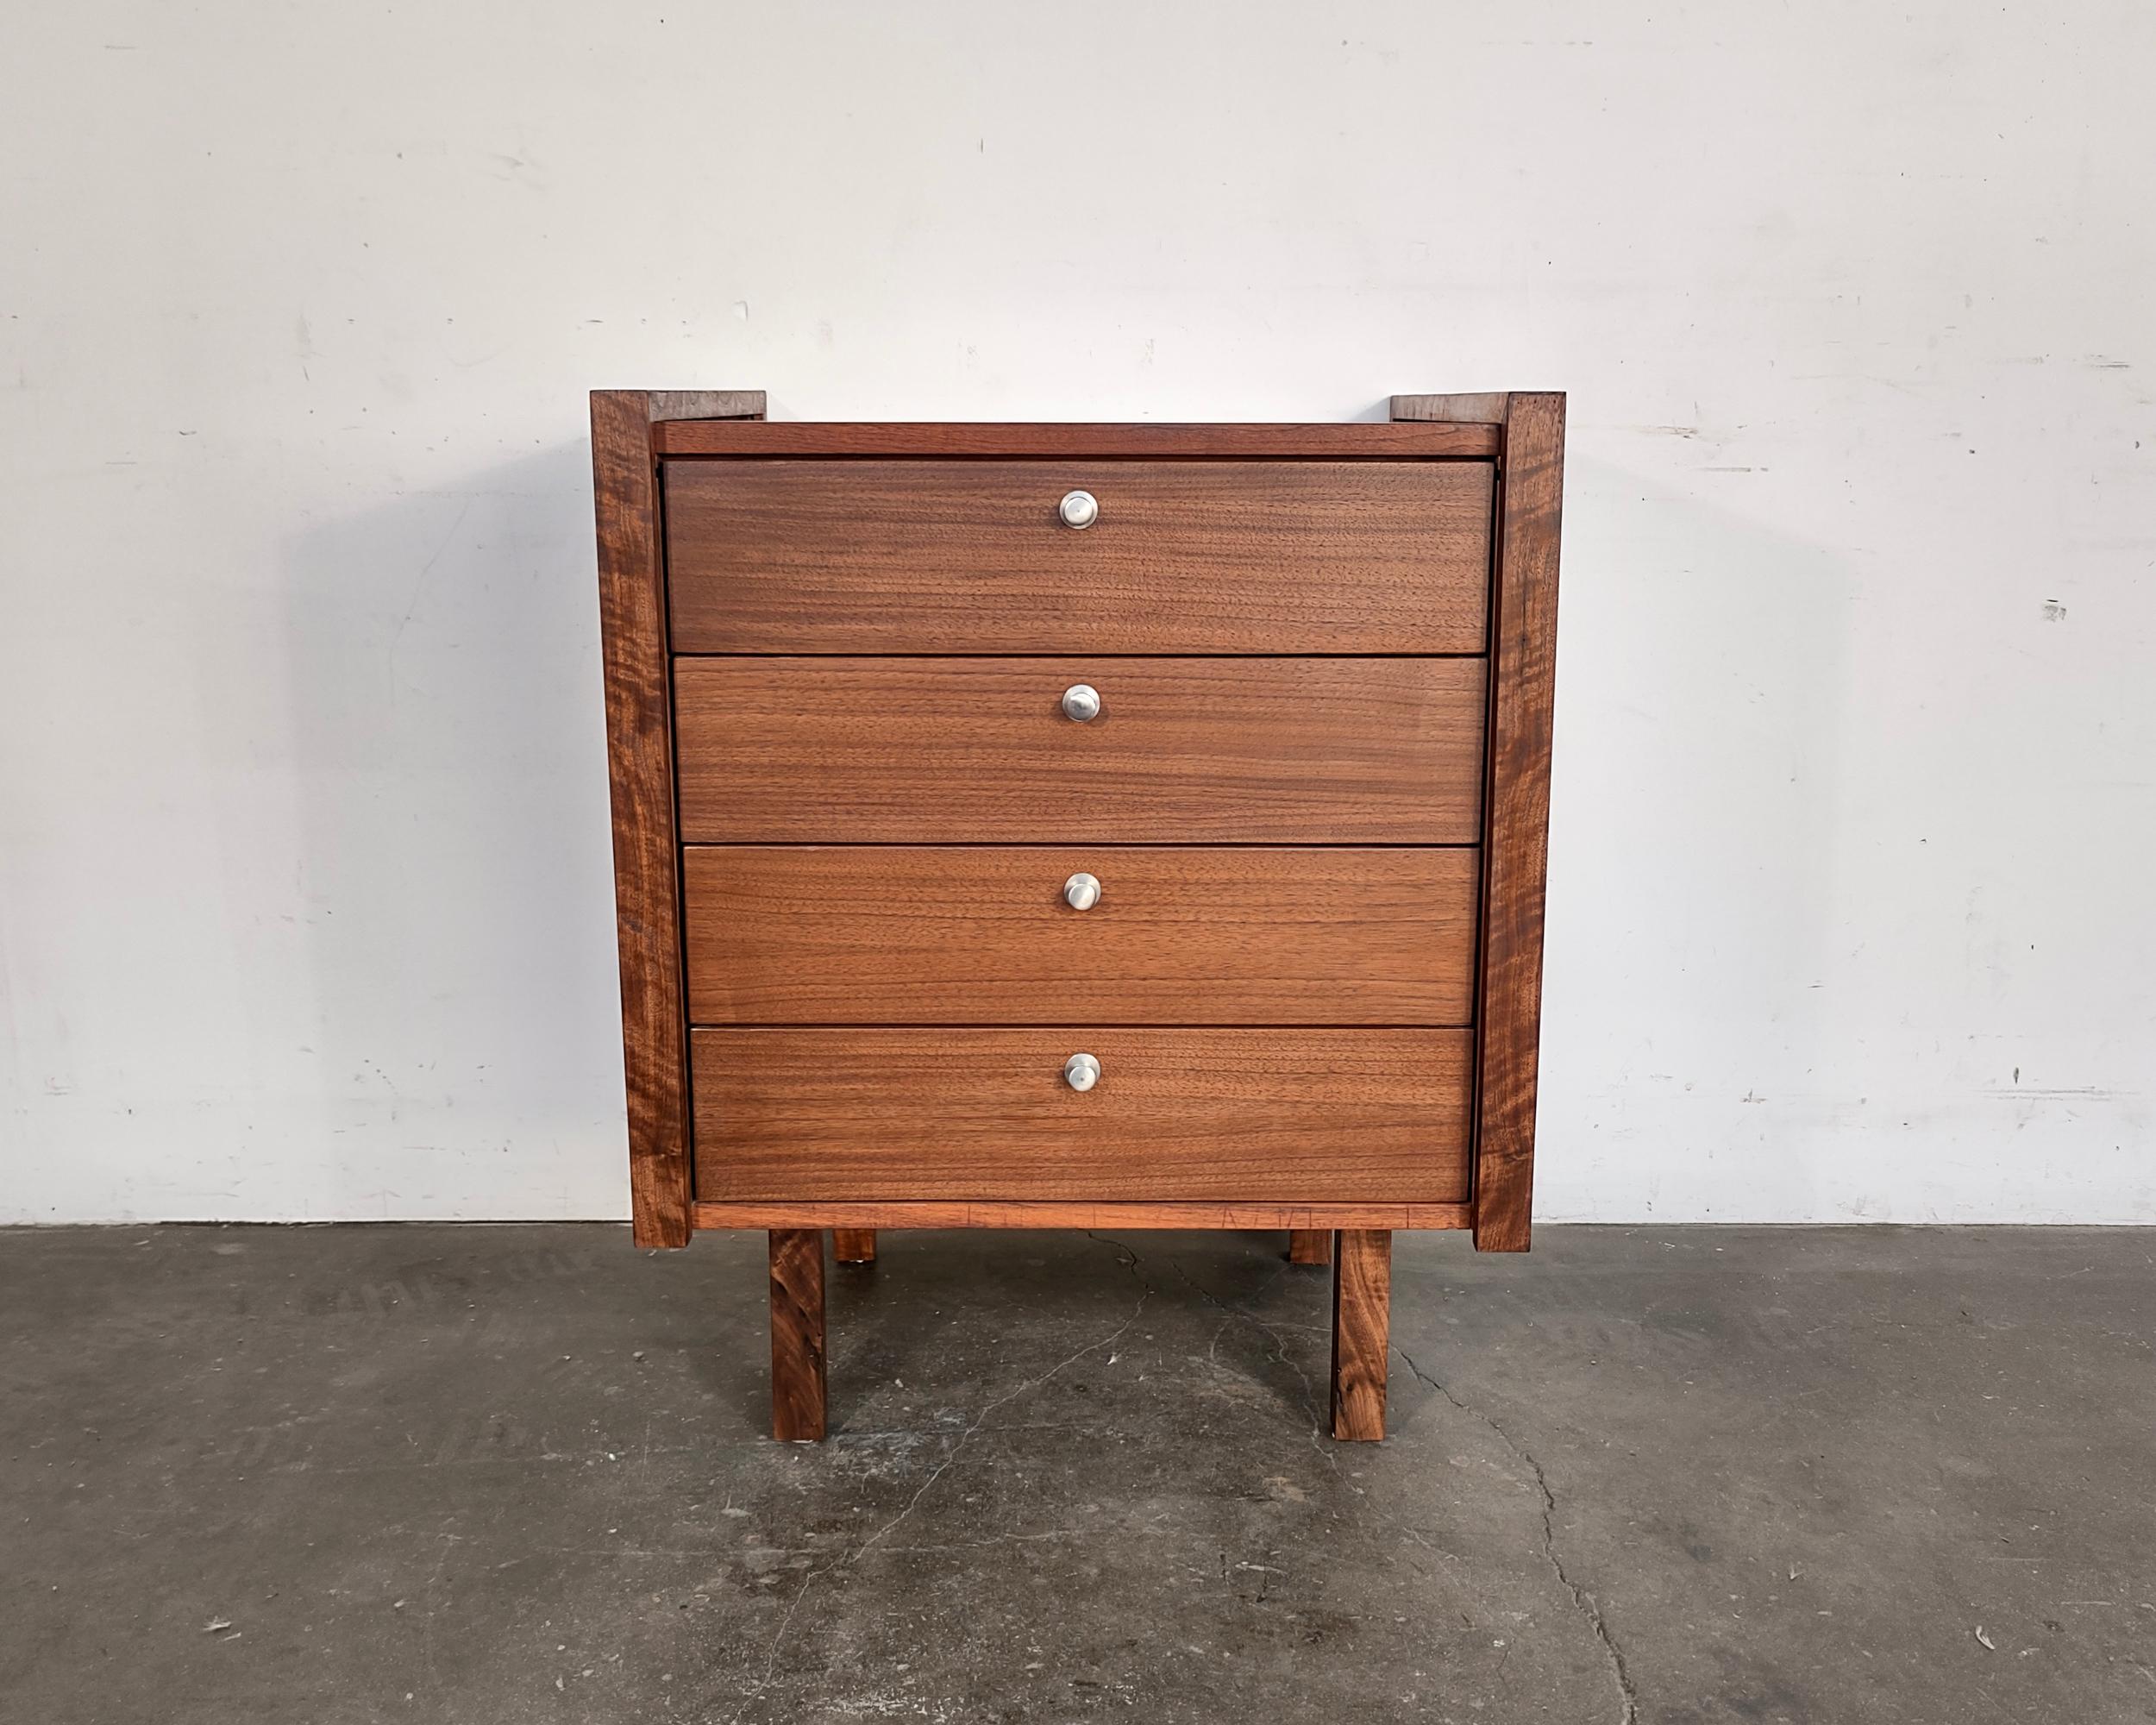 Professionally restored walnut chest of drawers designed by Martin Borenstein for Brown Saltman, circa 1960. Gorgeous walnut wood grain covering entire body with solid wood border details + legs. Four drawers with original aluminum hardware and